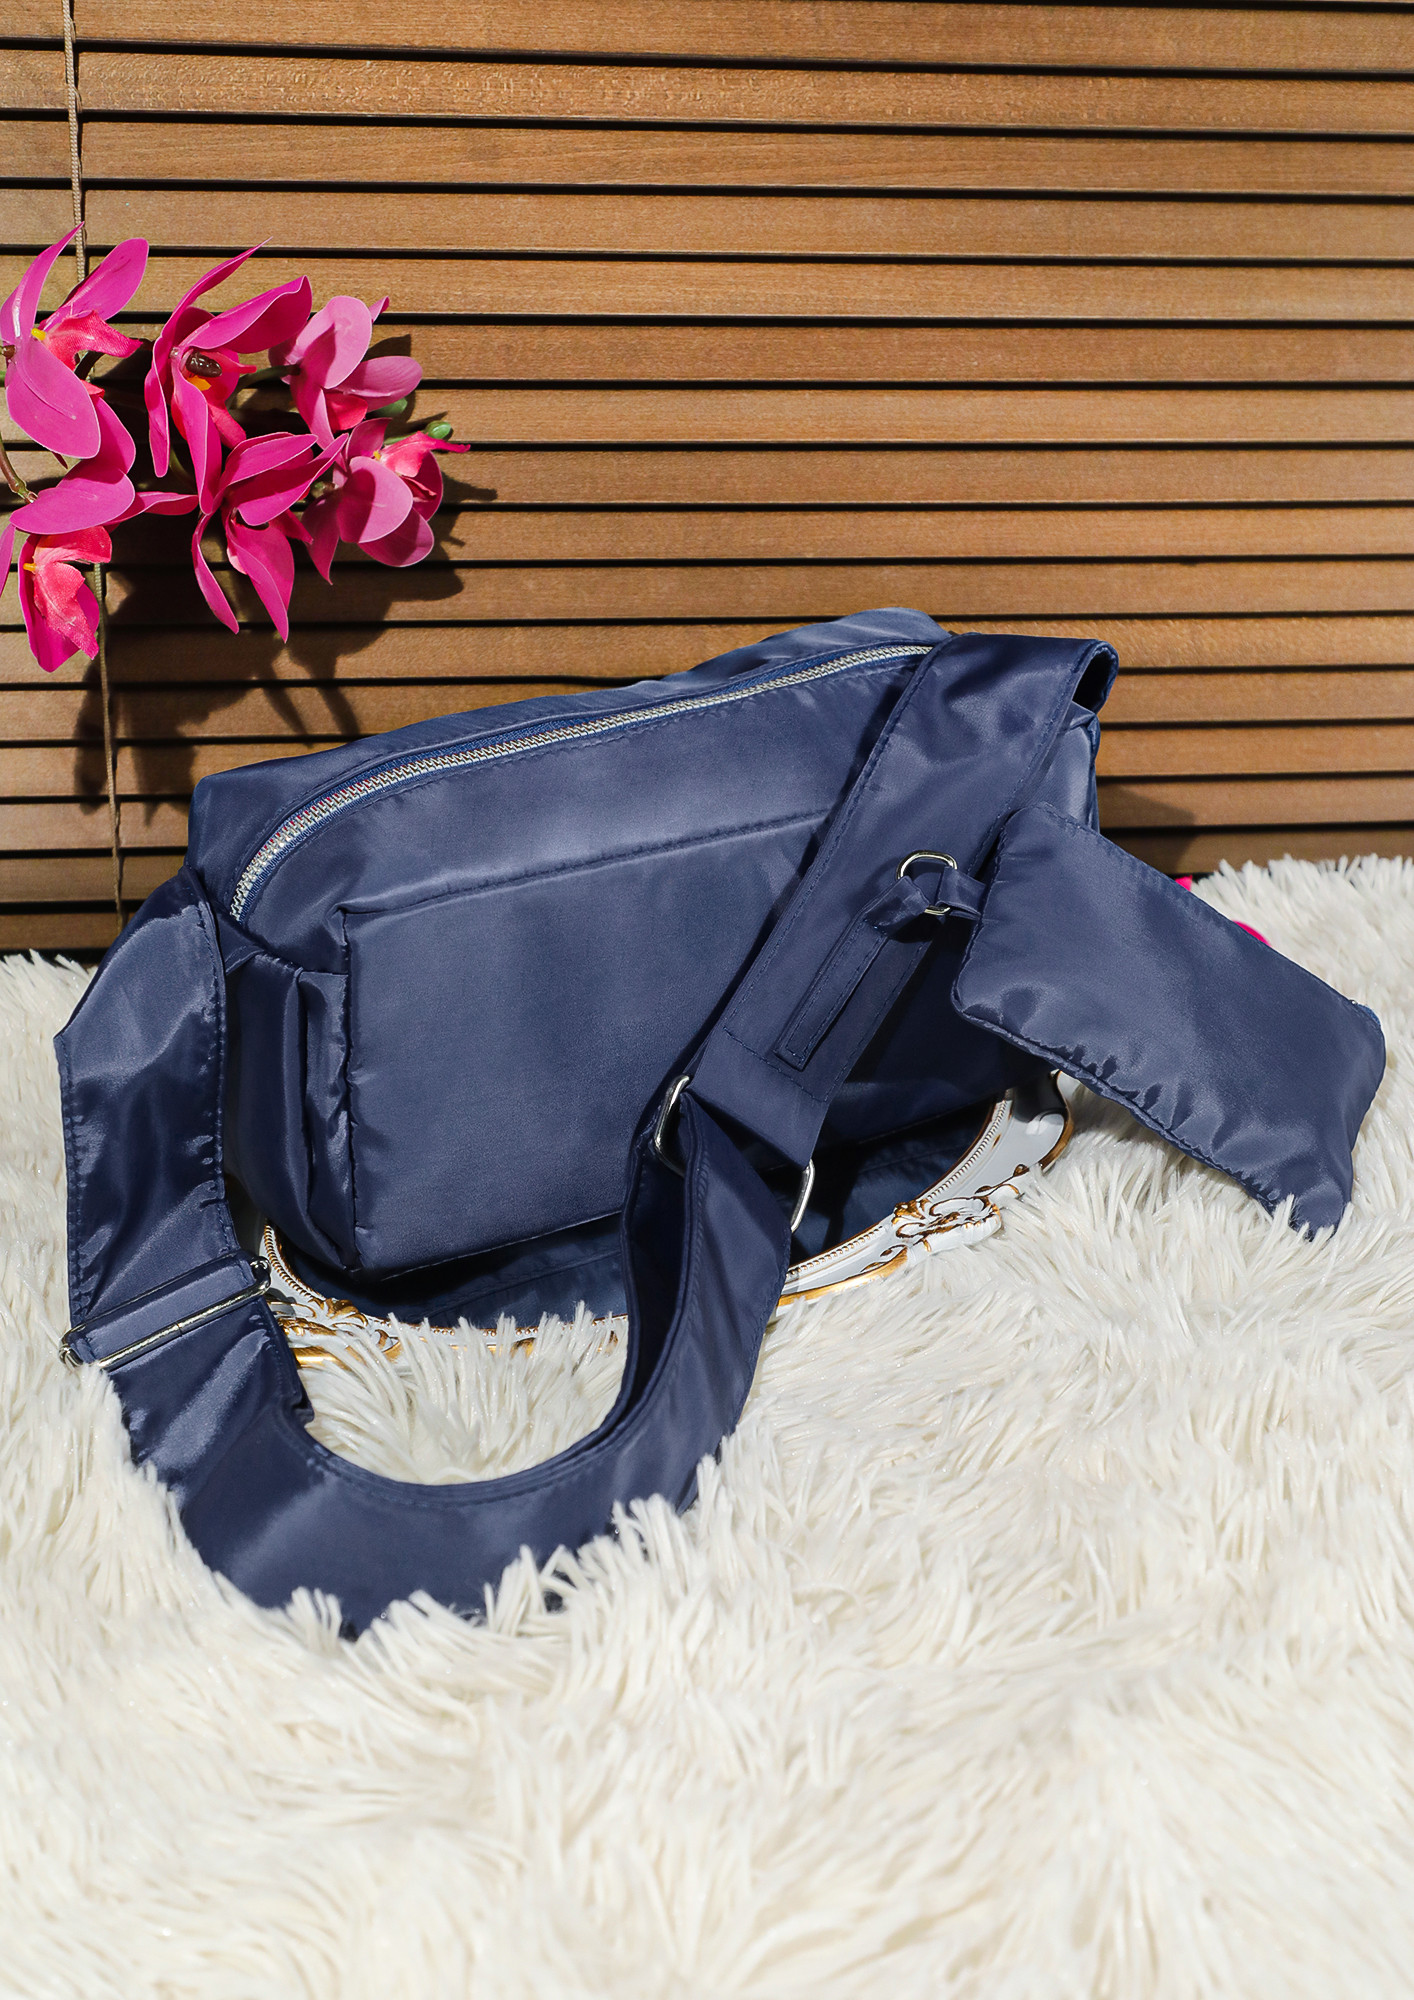 CYLINDRICAL BLUE SMALL SHOULDER DUFFLE BAG